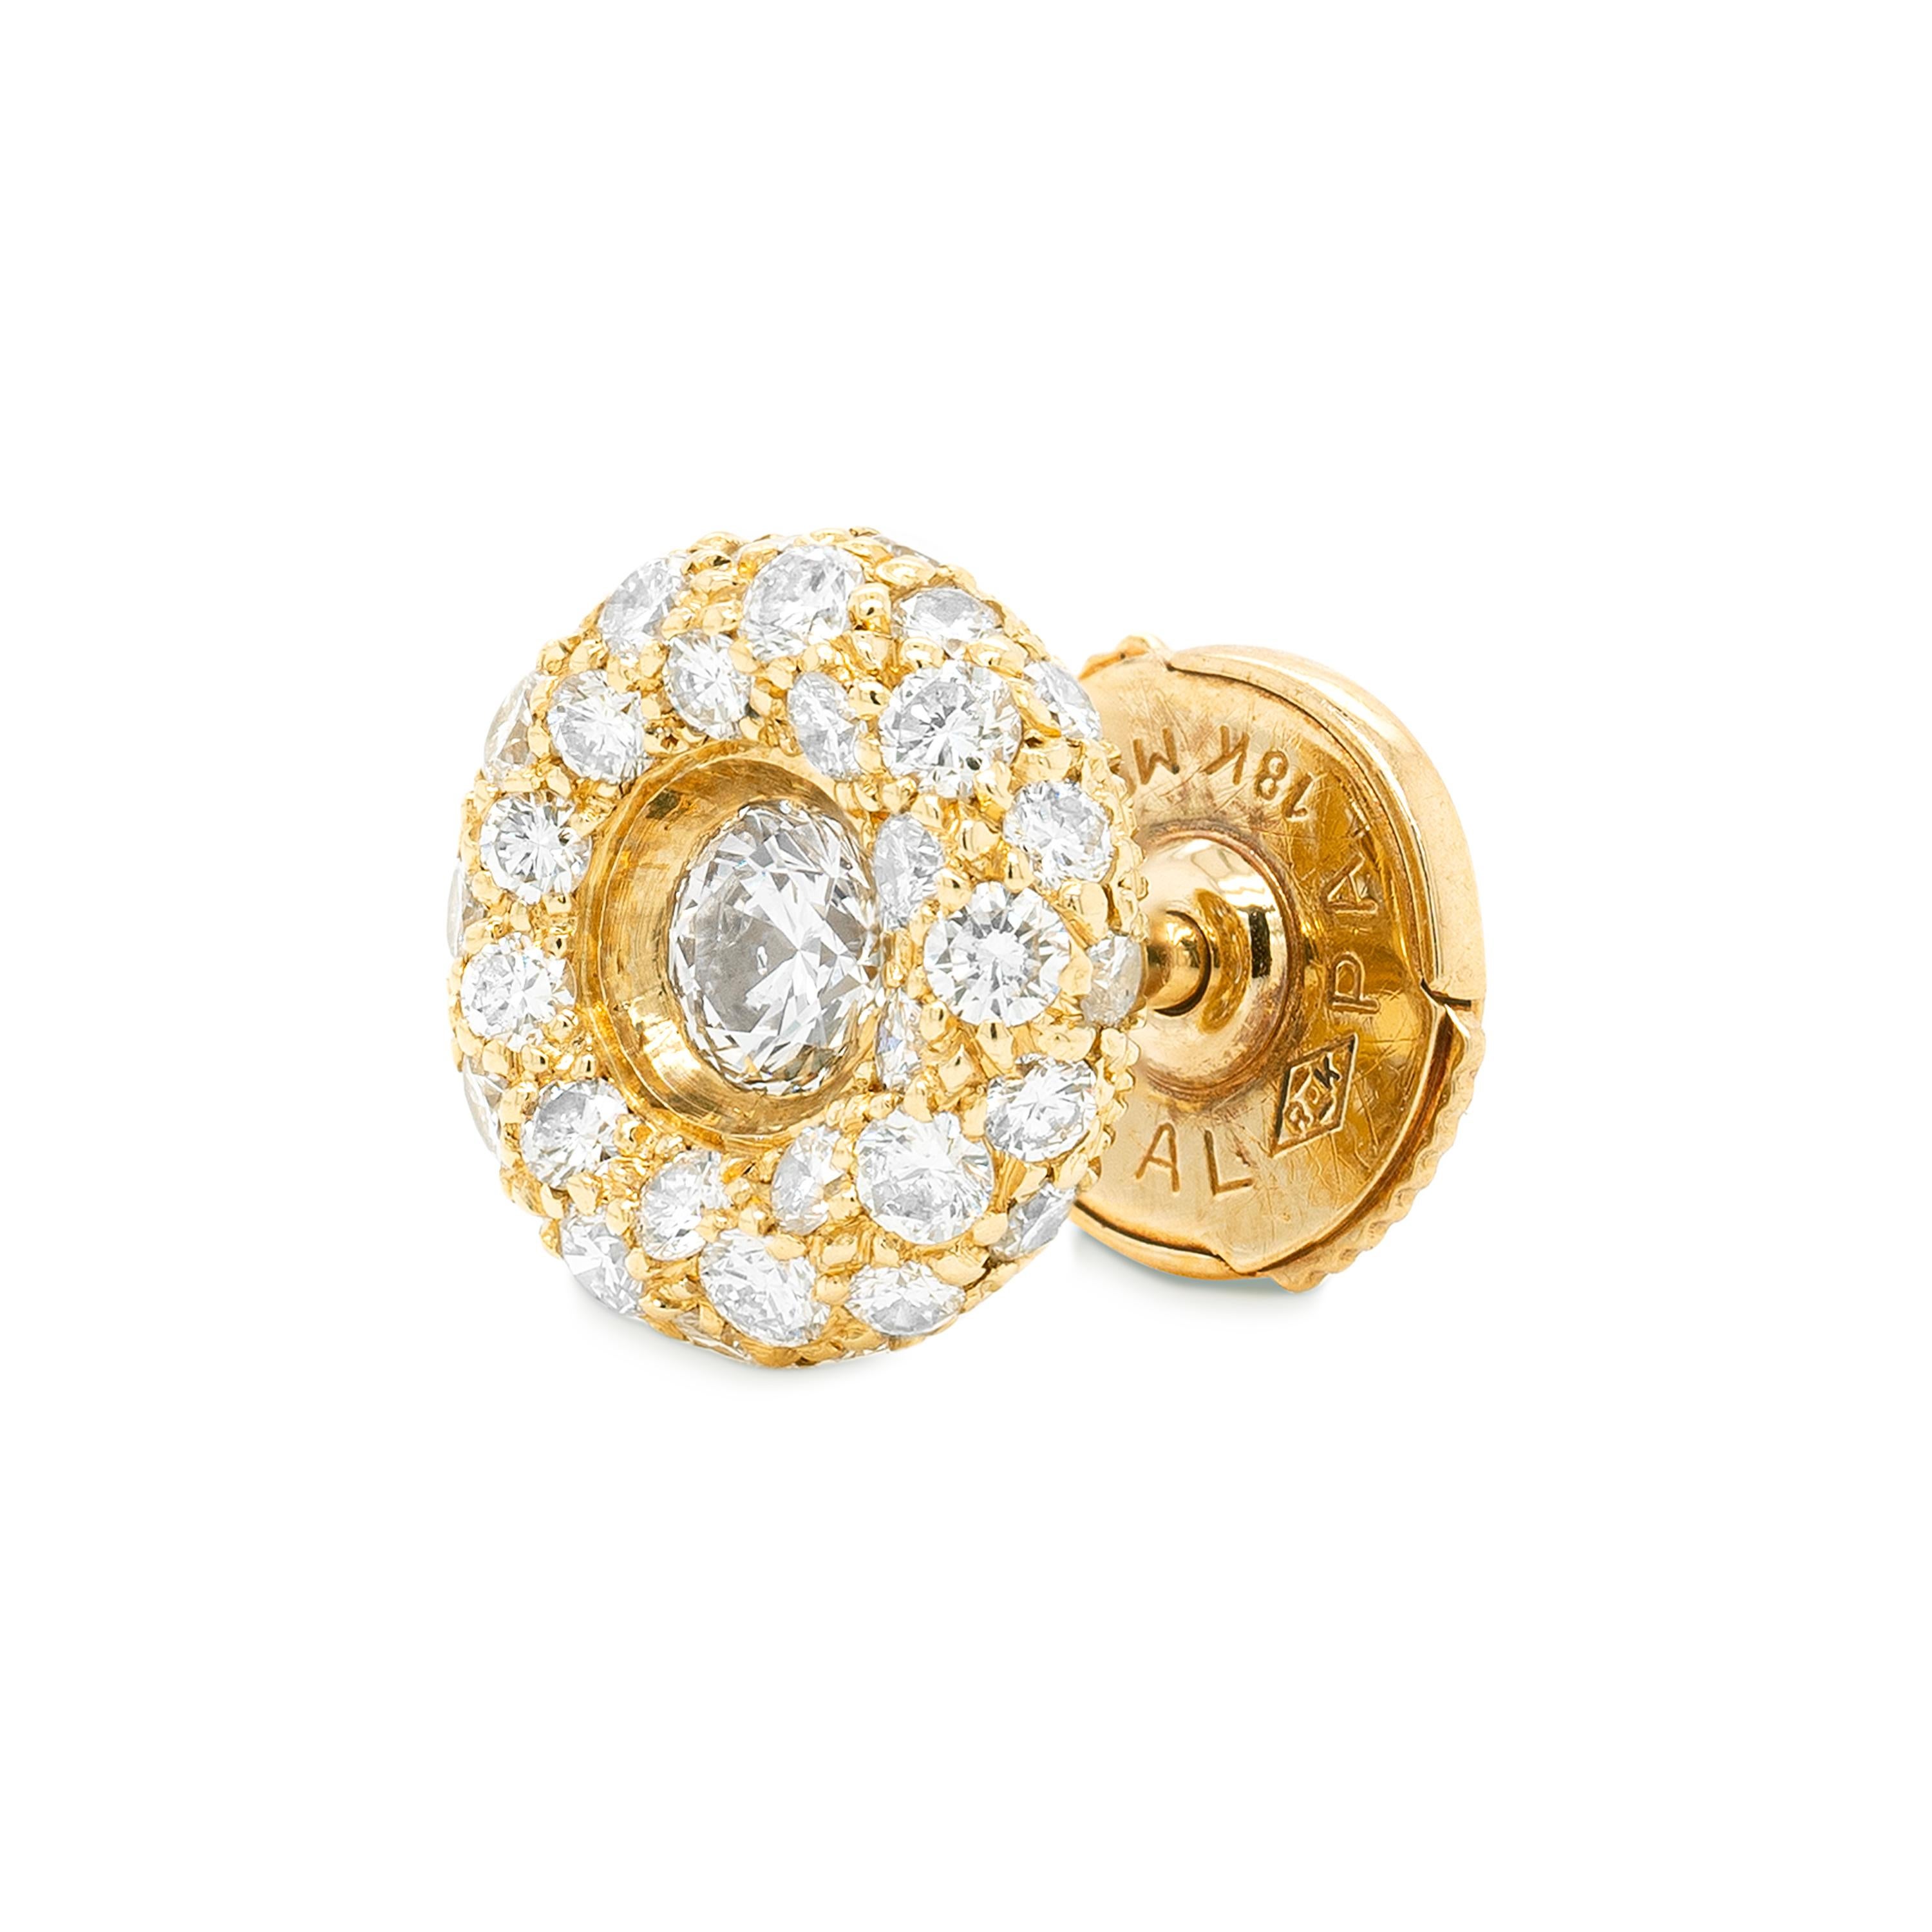 These lovely cluster stud earrings feature a beautiful round brilliant cut diamond mounted in the centre in a low rub-over setting. The centre diamond is highlighted by an 18 carat yellow gold convex border beautifully inlaid with smaller round